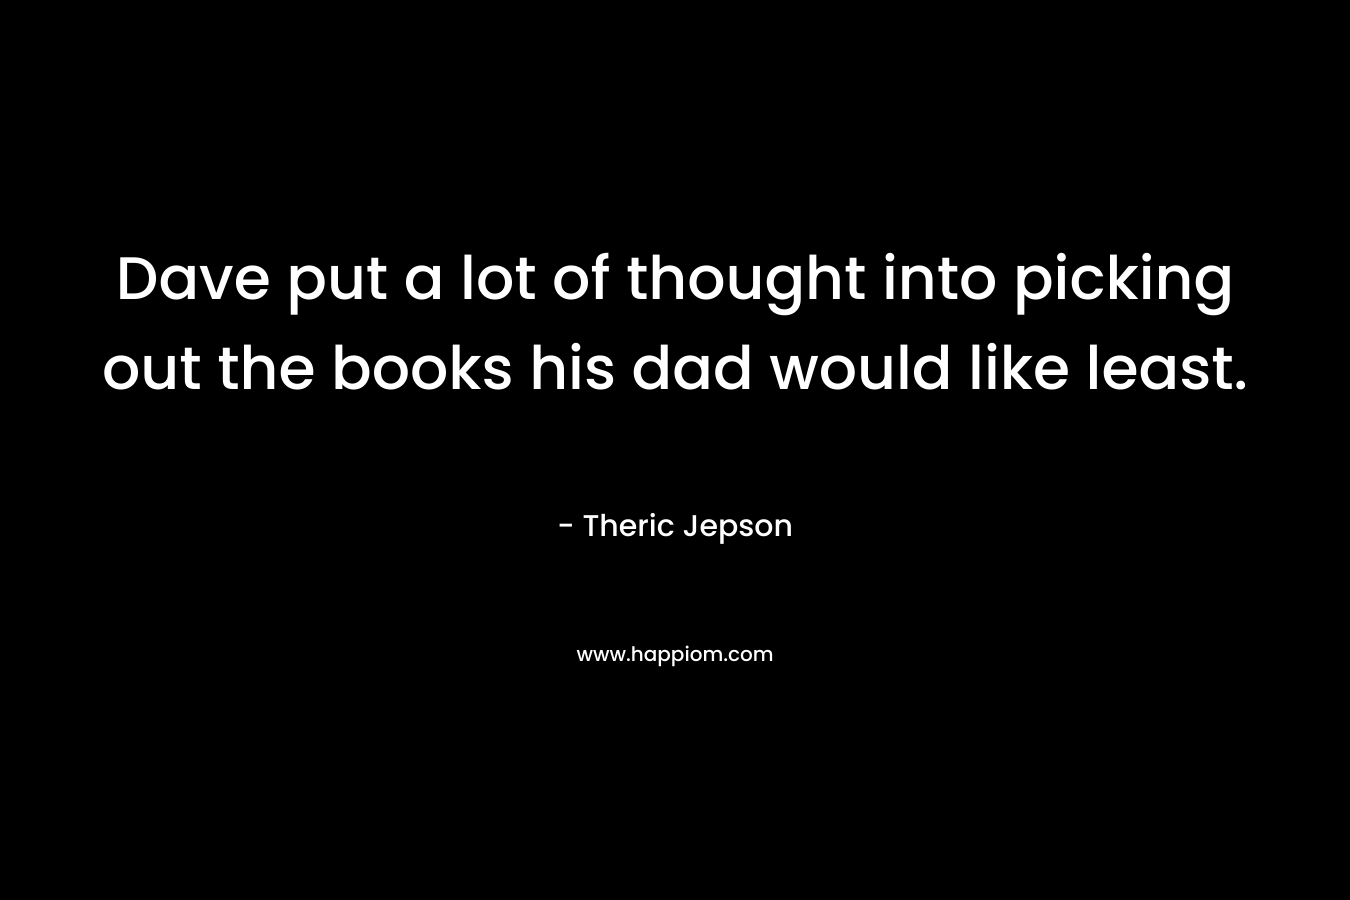 Dave put a lot of thought into picking out the books his dad would like least. – Theric Jepson